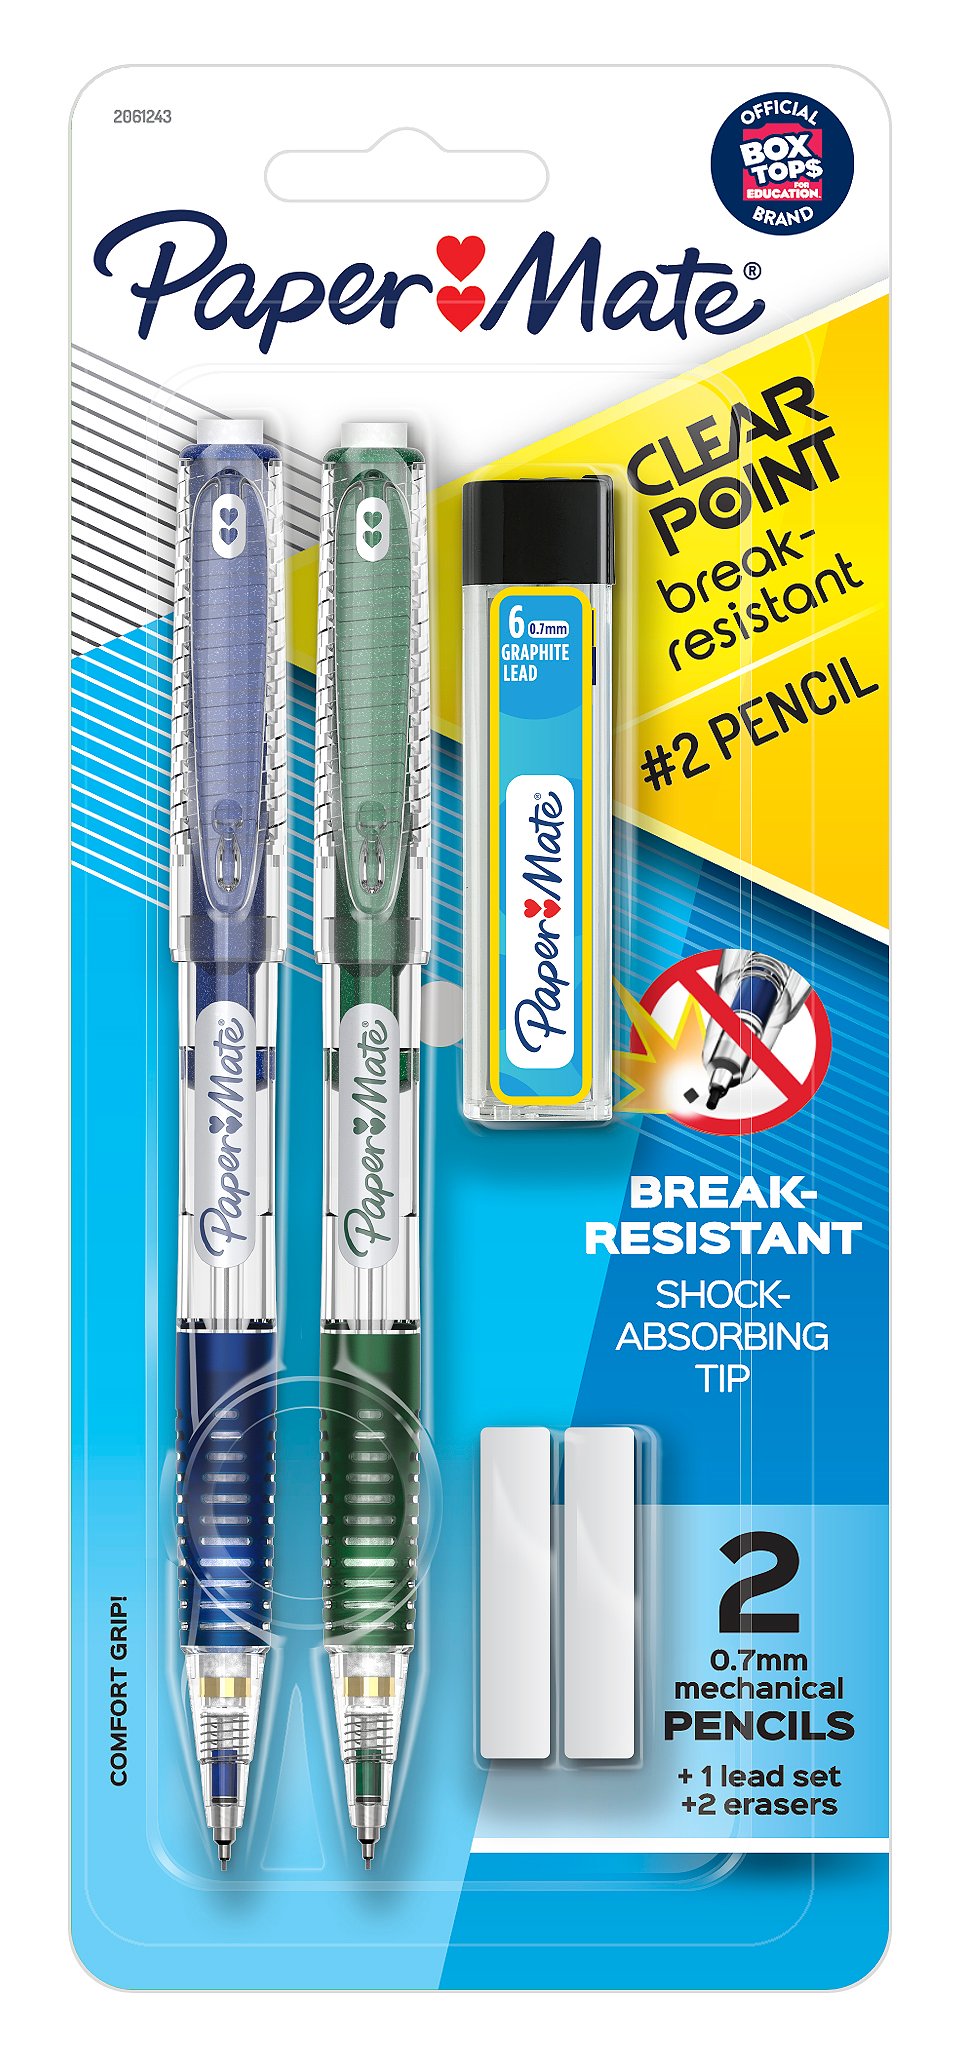 crowd order anytime Paper Mate Clearpoint Break-Resistant Mechanical Pencil Sets, 0.7mm, HB #2  Lead | Papermate